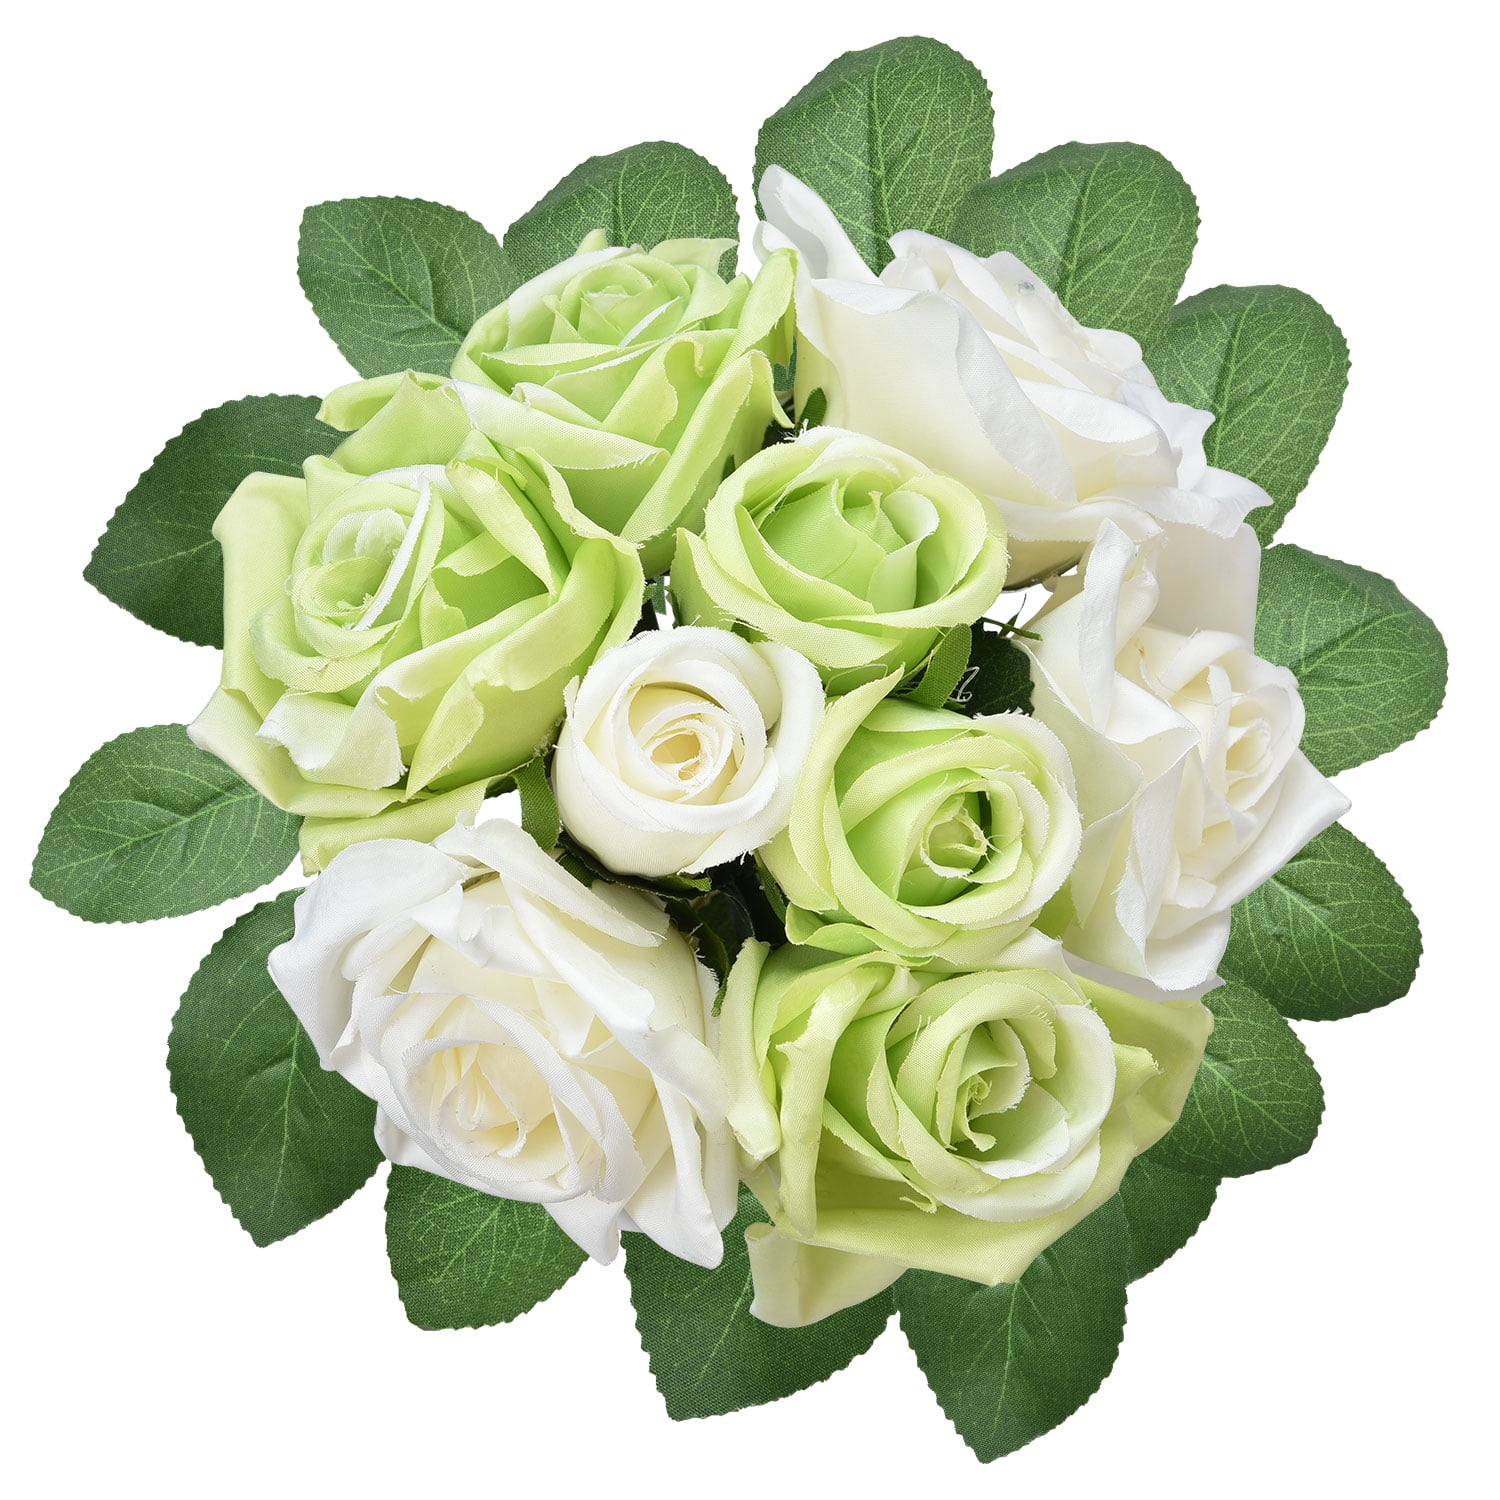 Artificial Flowers Fake Bouquet Flowers Green Plants Home Wedding Decorations